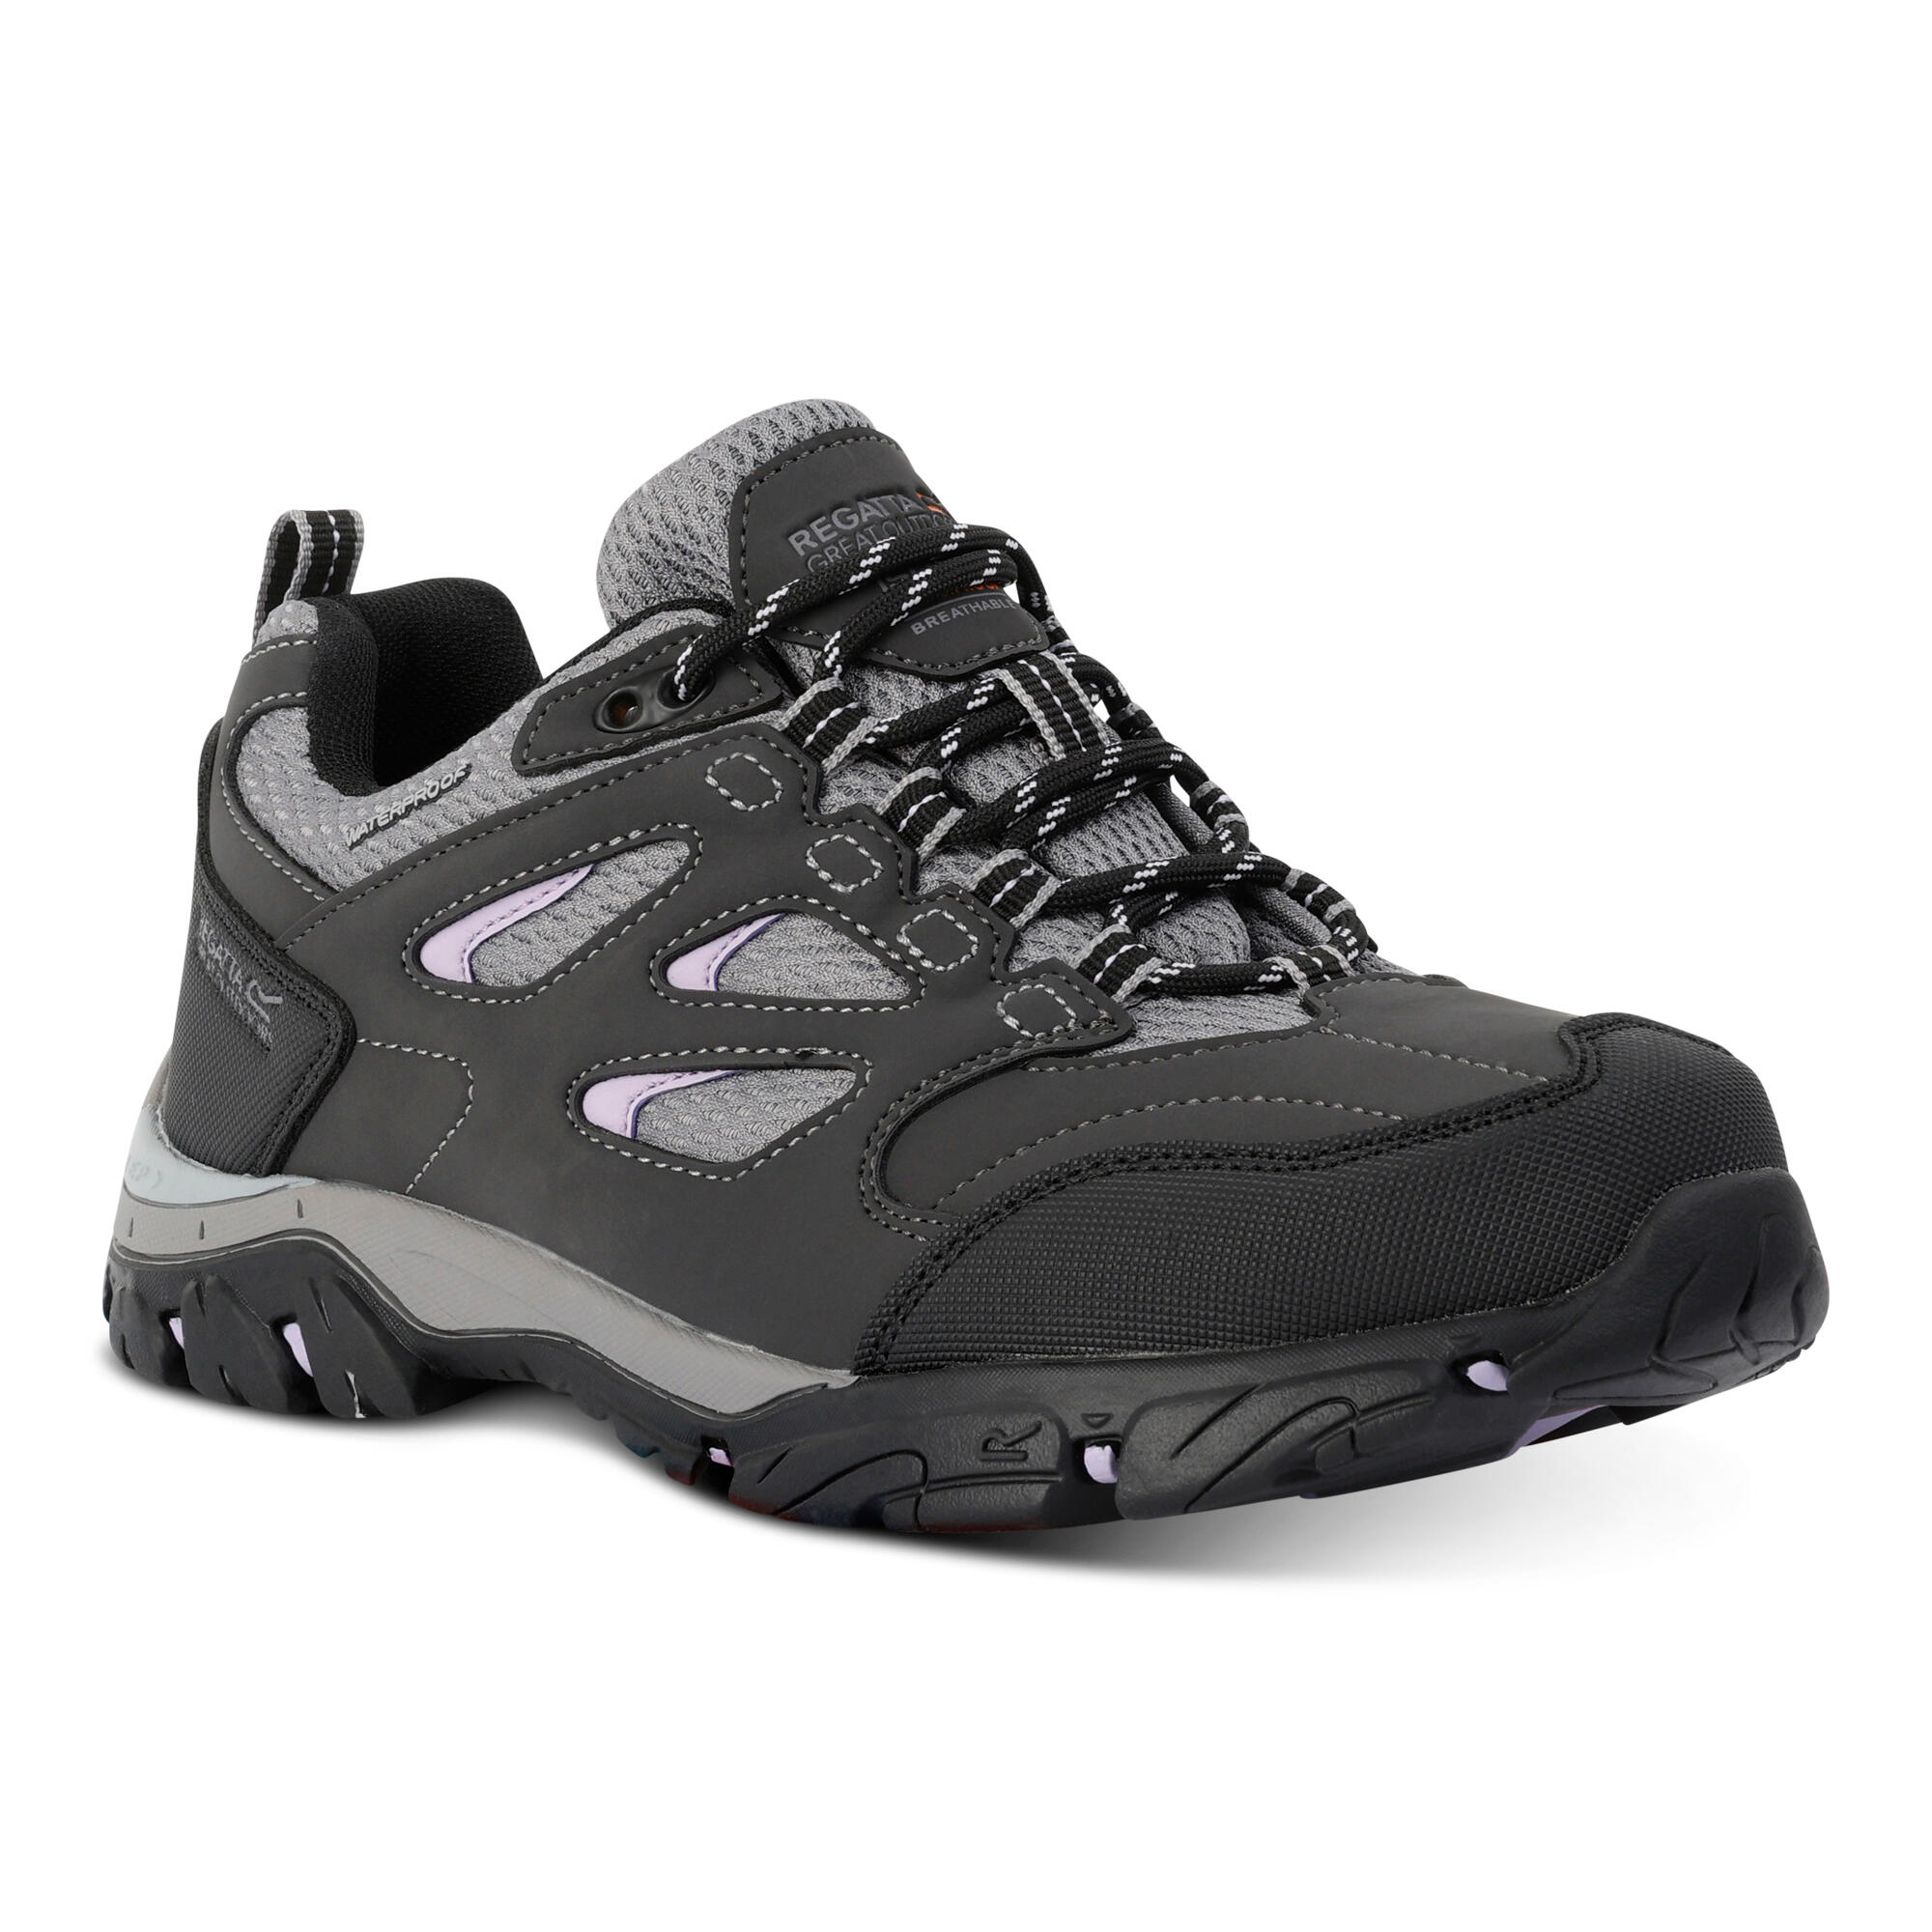 Lady Holcombe IEP Low Women's Hiking Boots 4/5